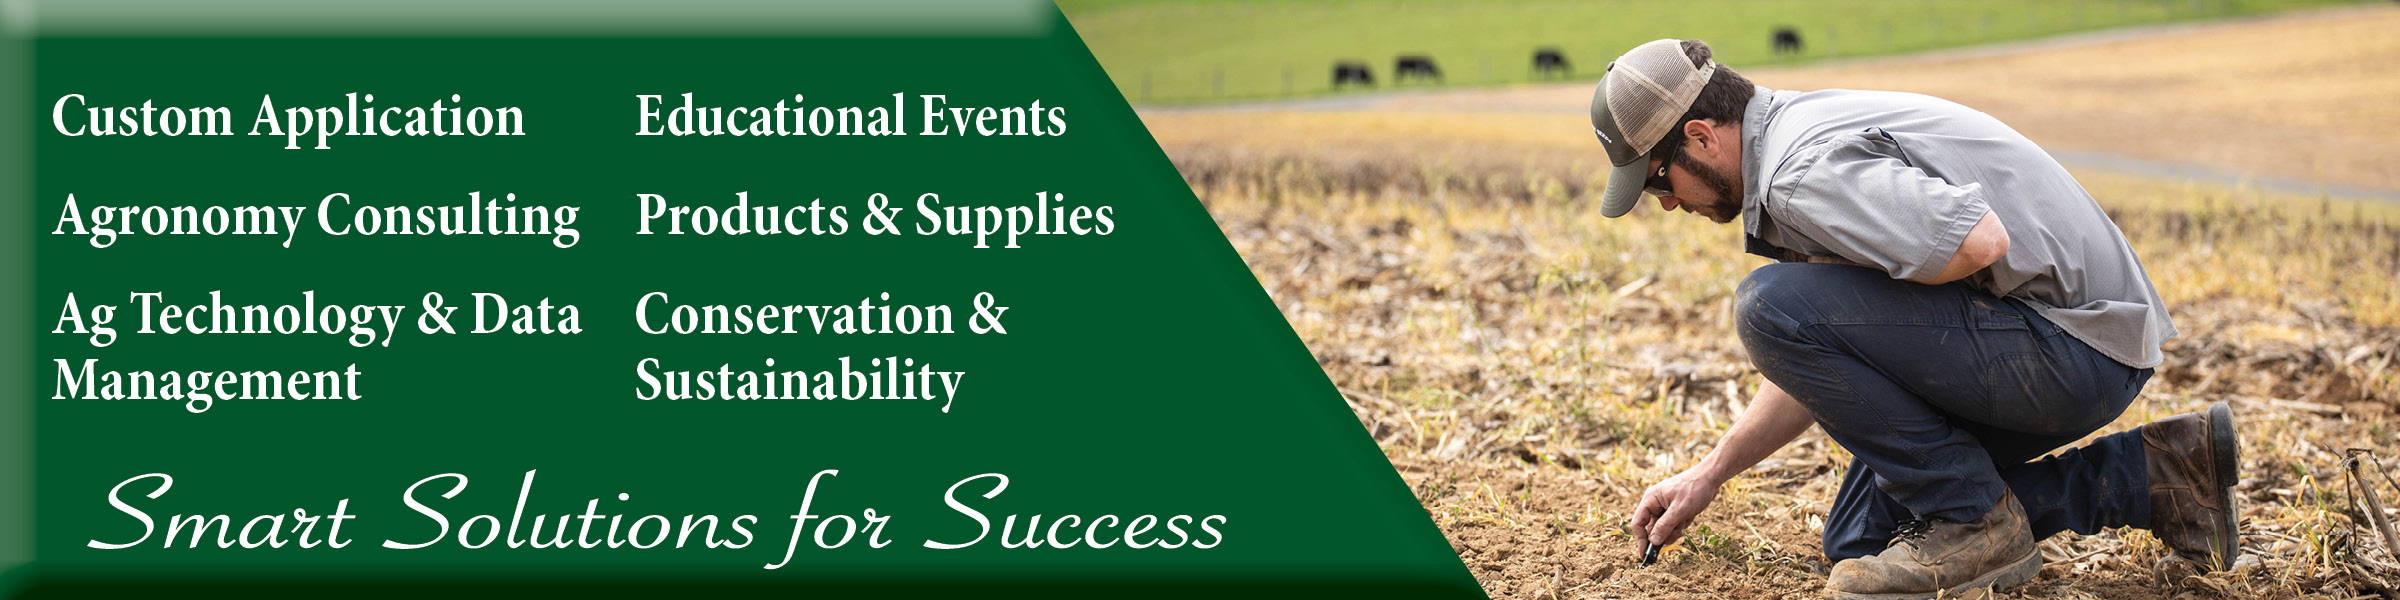 Agronomy Banner, Smart Solutions for Success